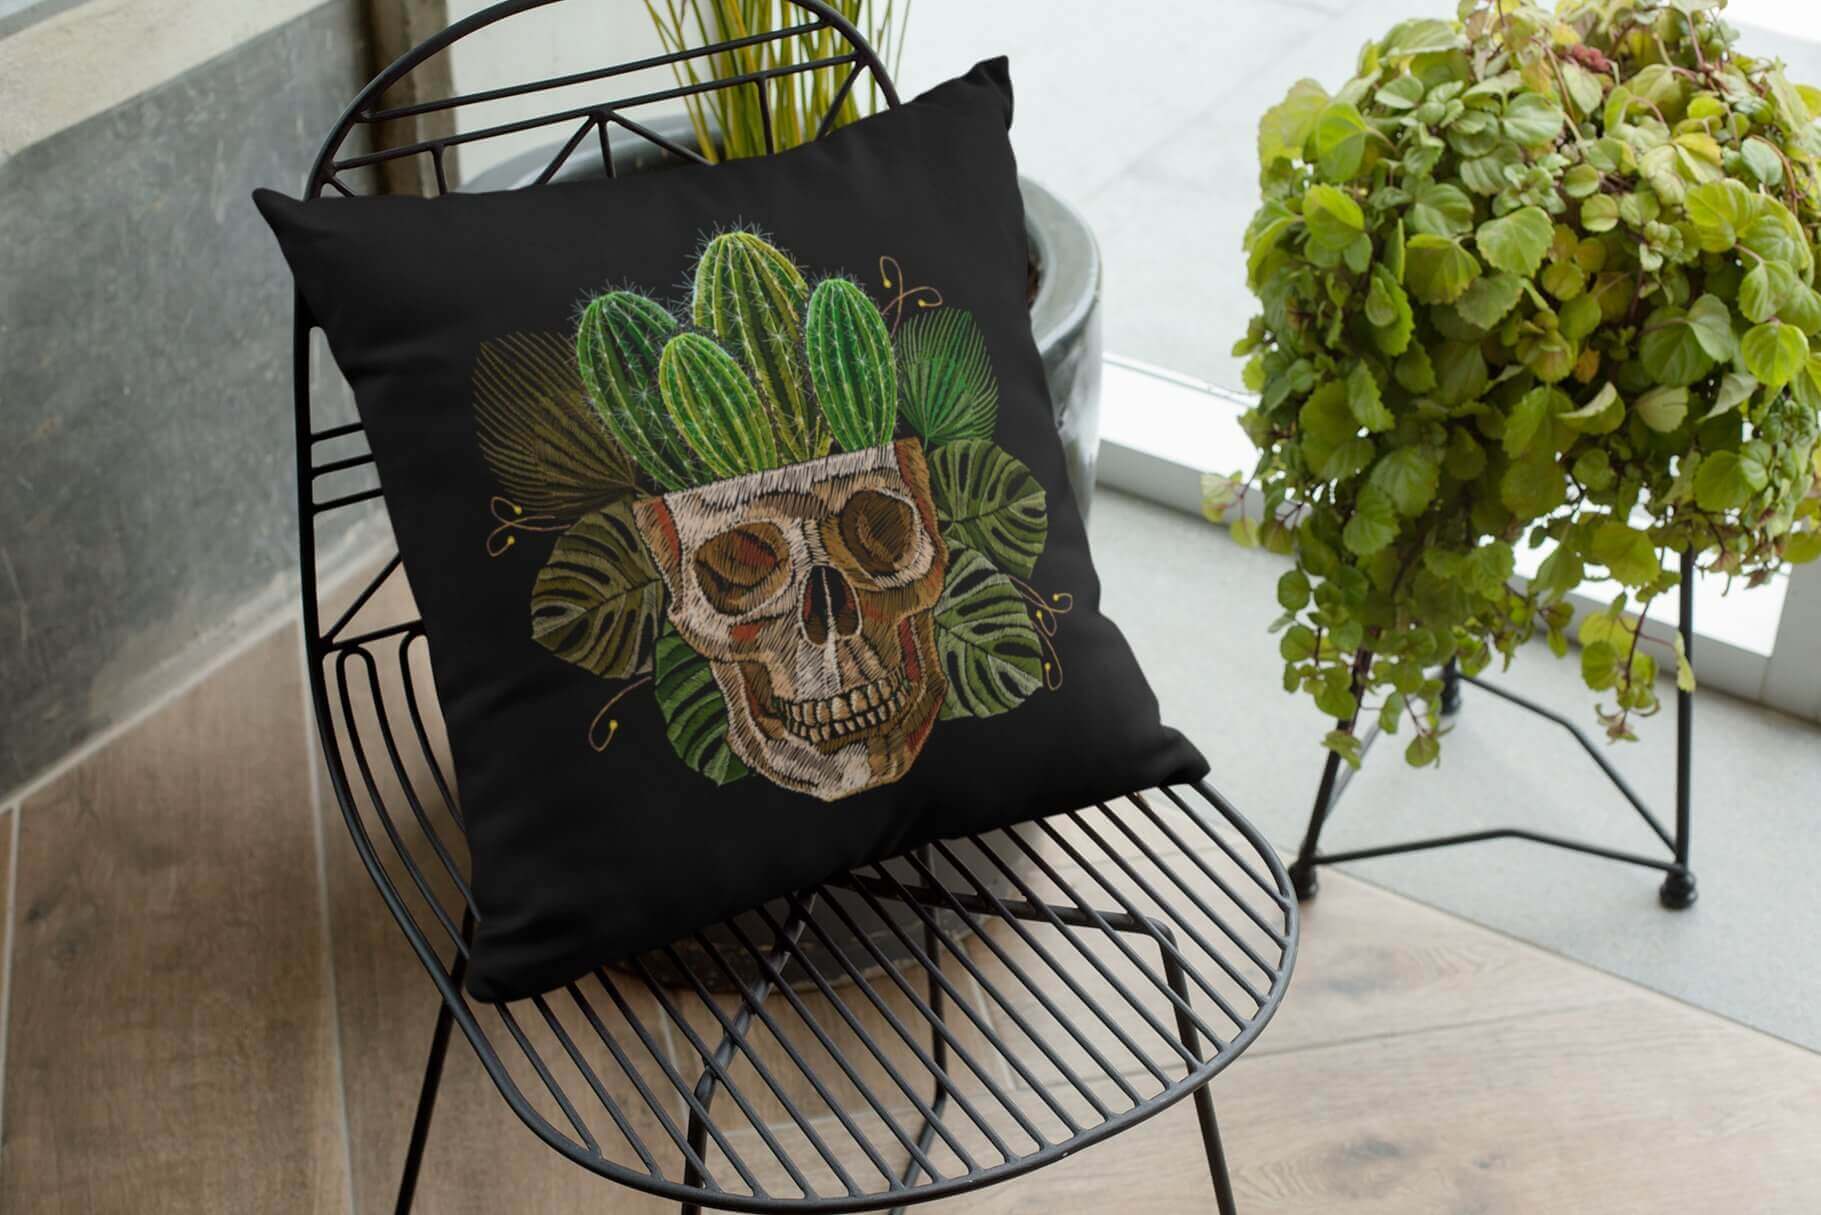 An embroidered skull from which cacti grow on a black pillow.